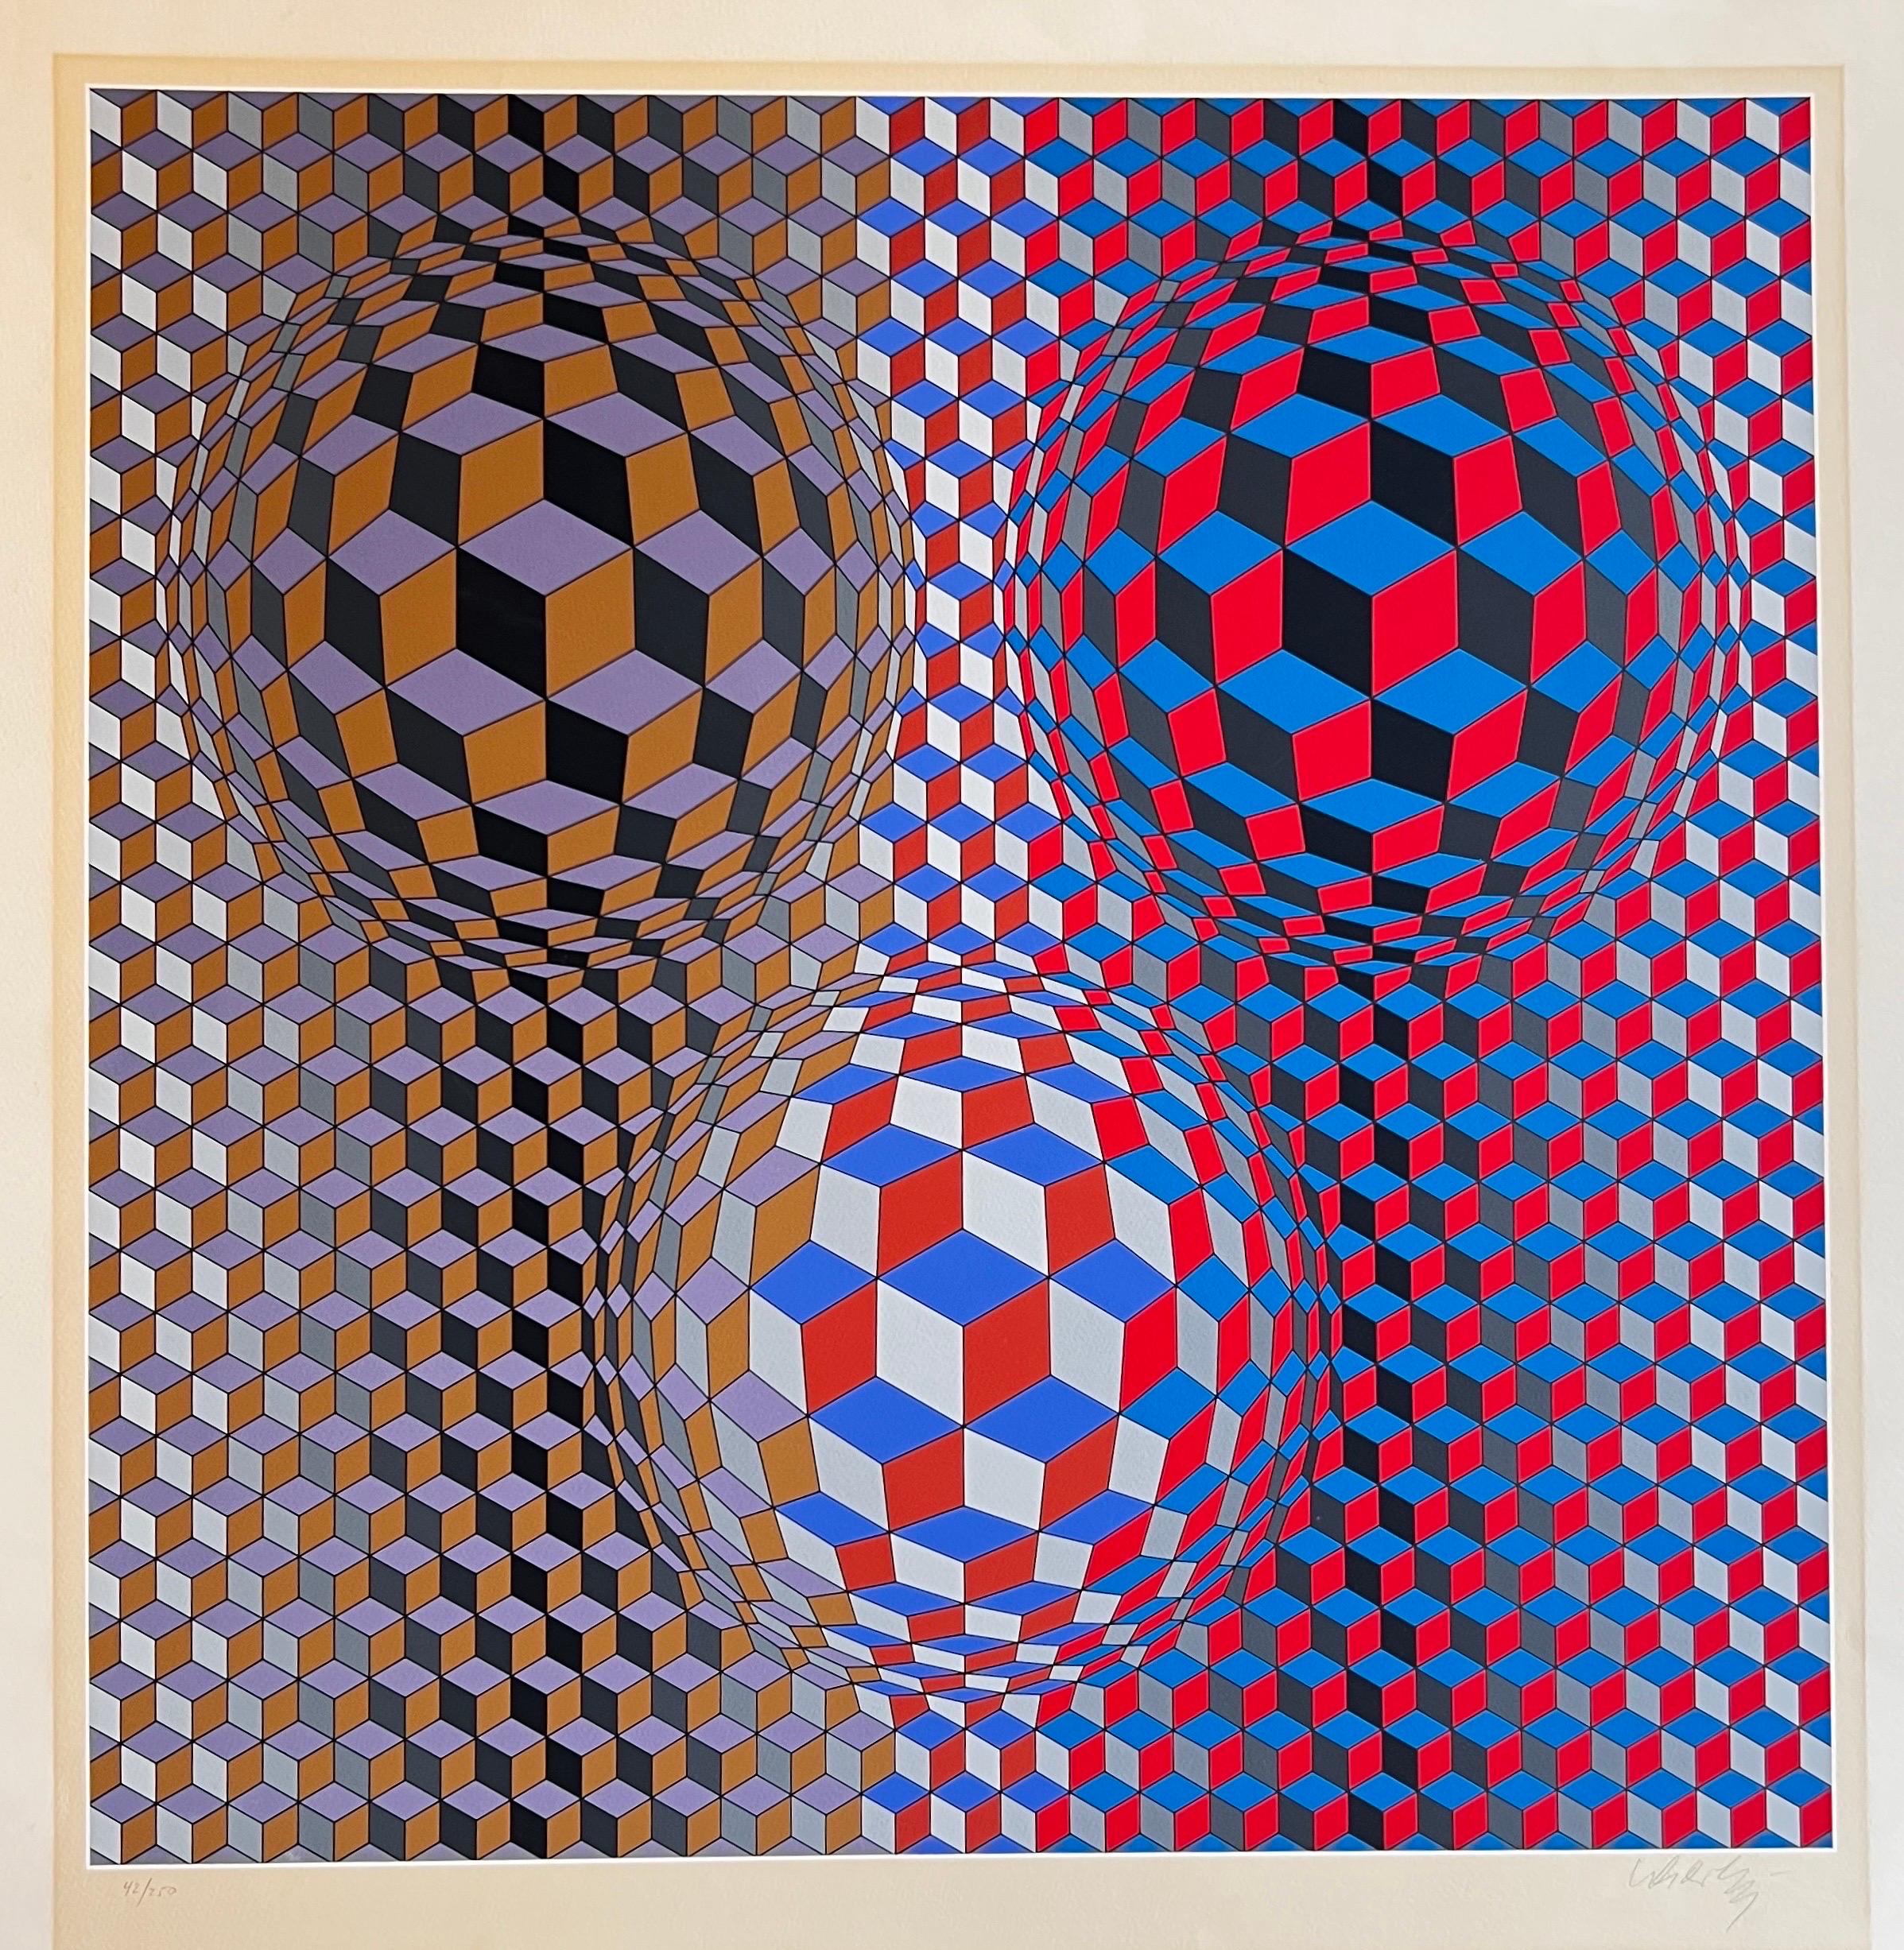 Presenting an authentic edition work by the esteemed artist Victor Vasarely, renowned for his distinct artistic style and captivating visual language. This limited edition piece offers viewers a glimpse into Vasarely's unique artistic